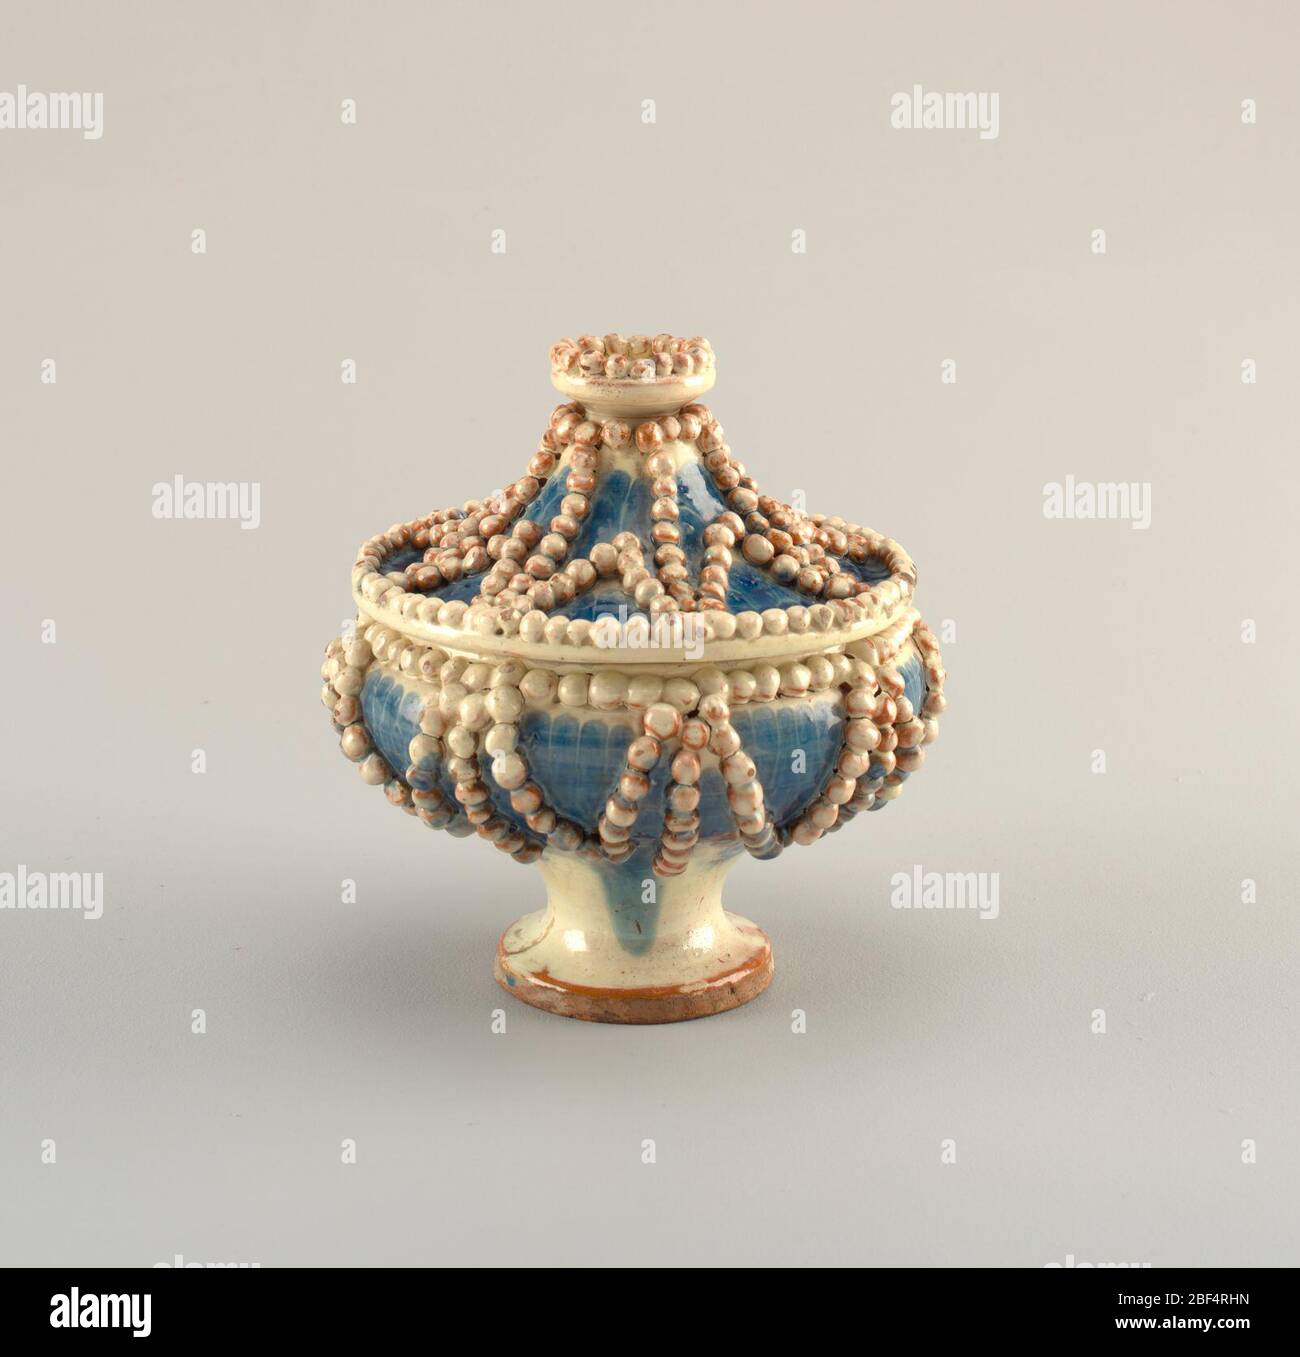 Bowl and lid. Blue footed bowl with star pattern of white pearls all over. Finial made up of crown of pearls. Stock Photo